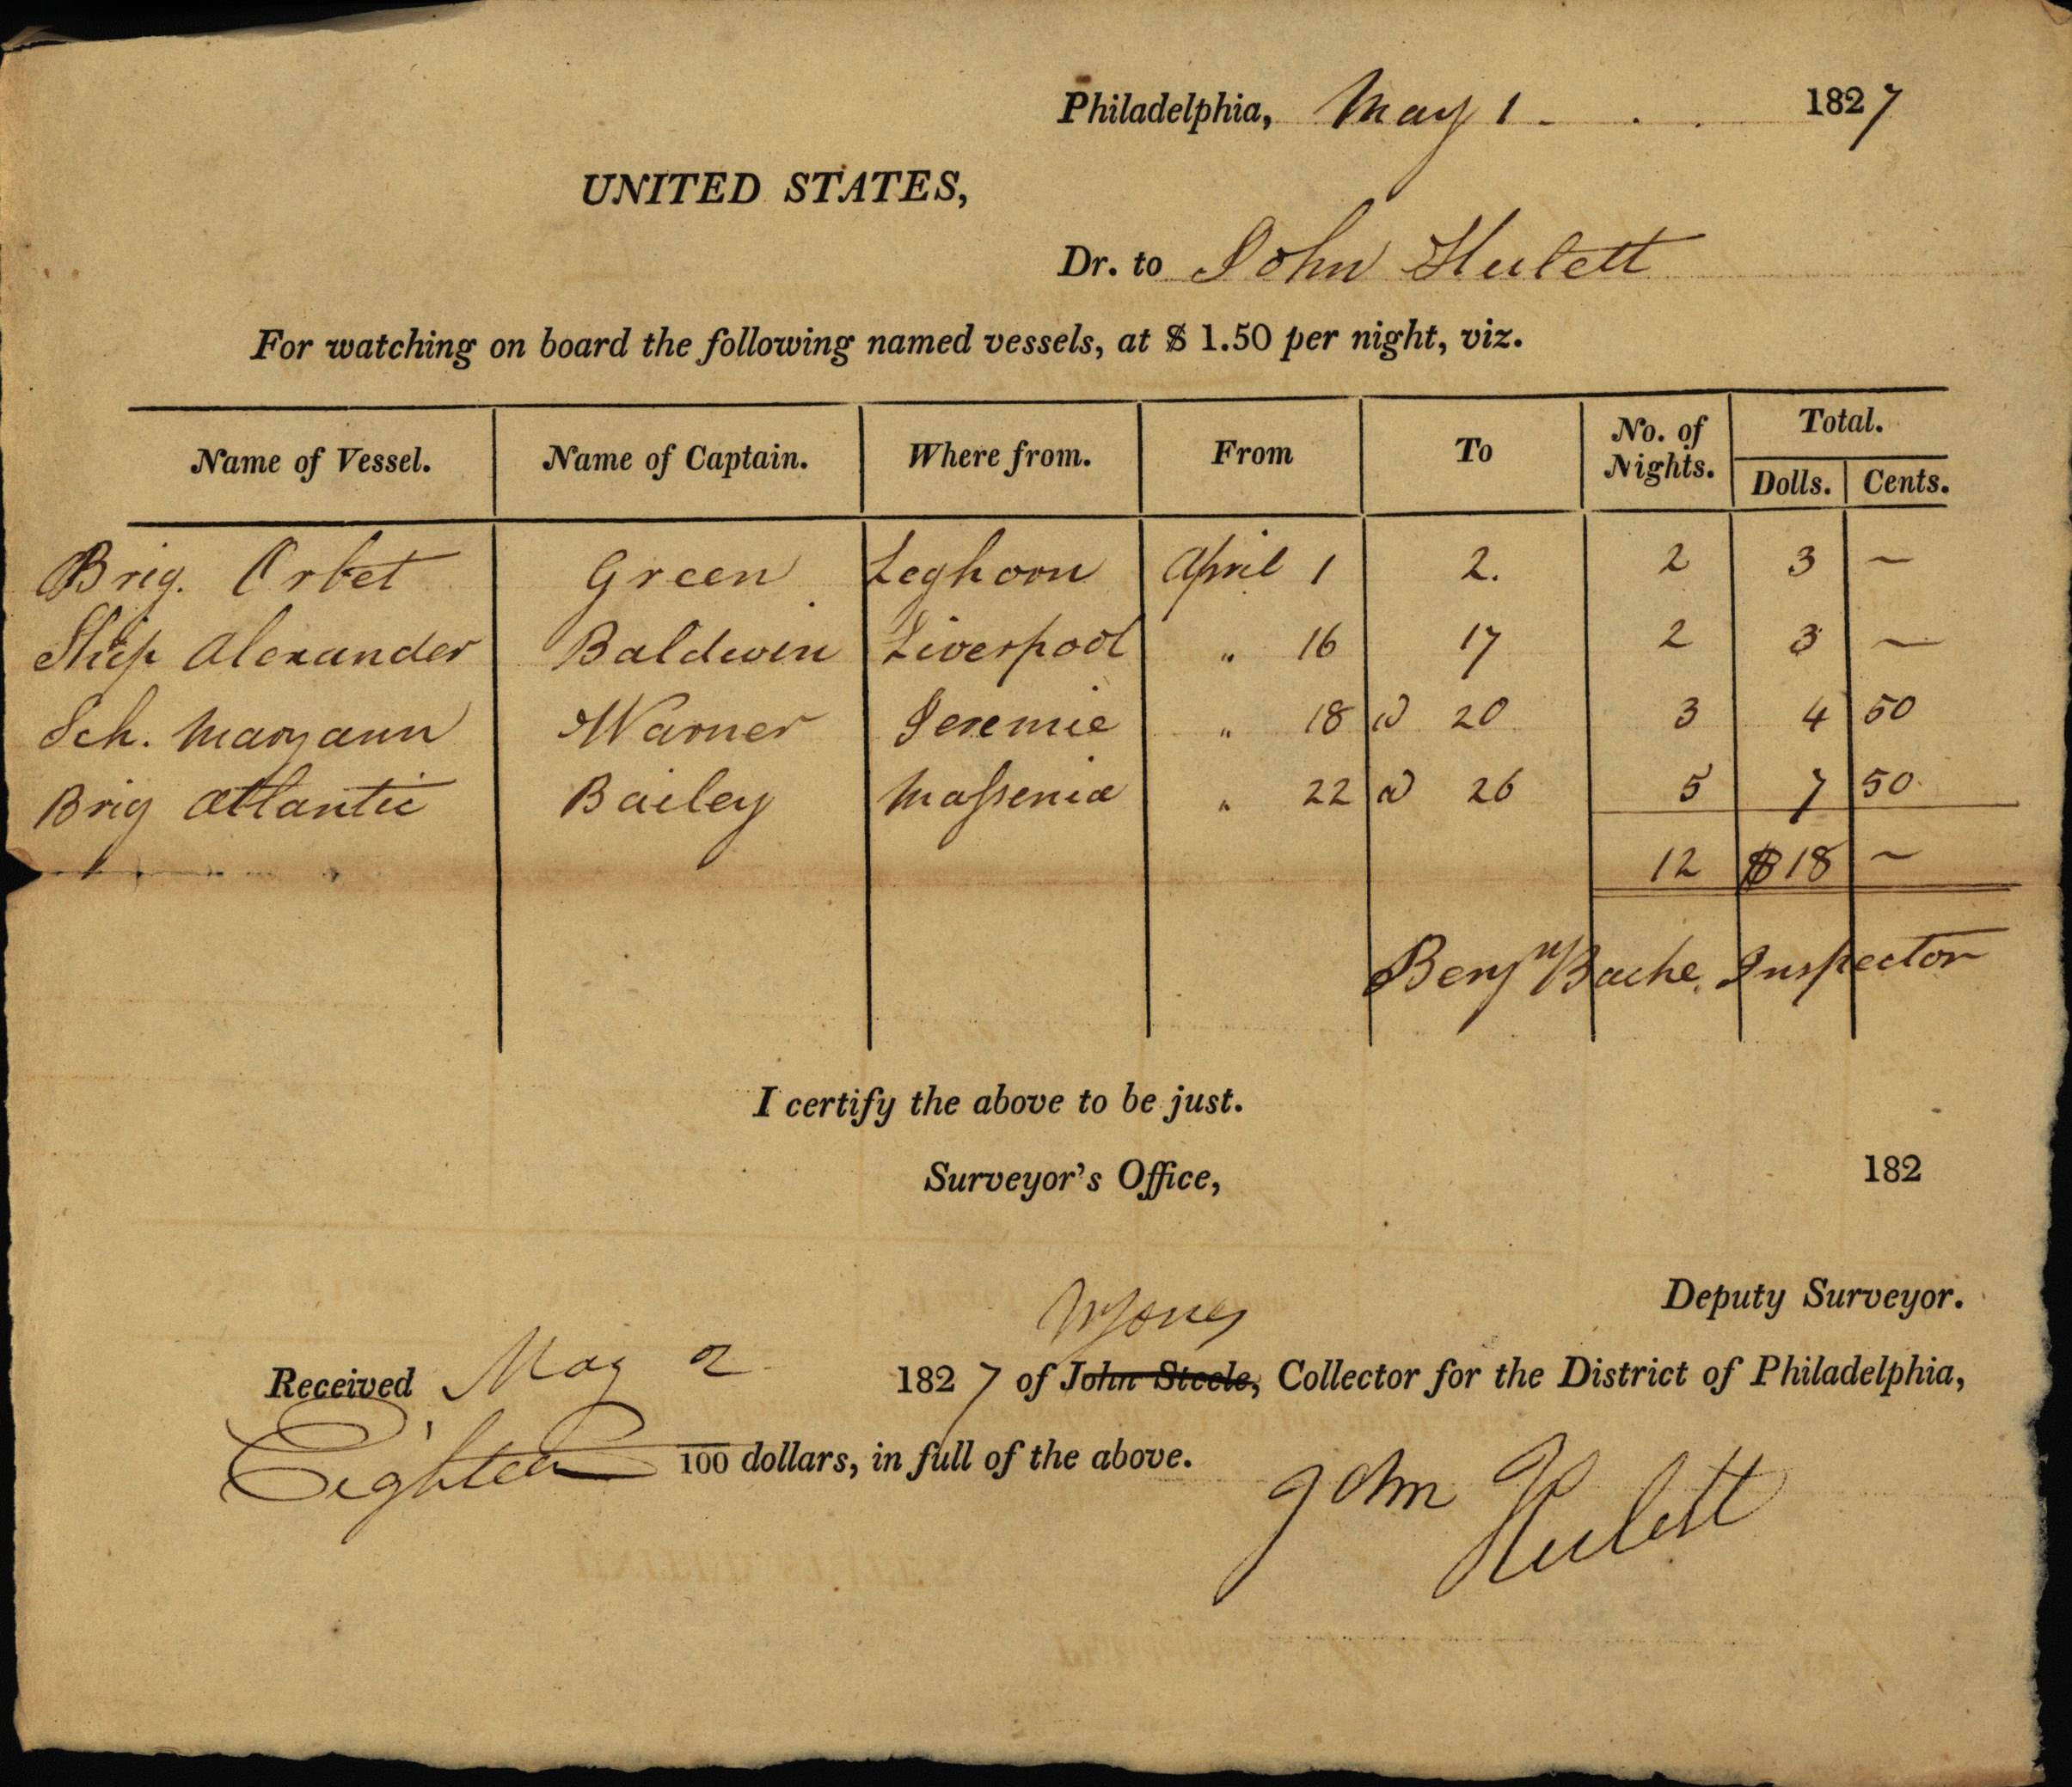 Compensation for night watchman aboard vessels, 1827